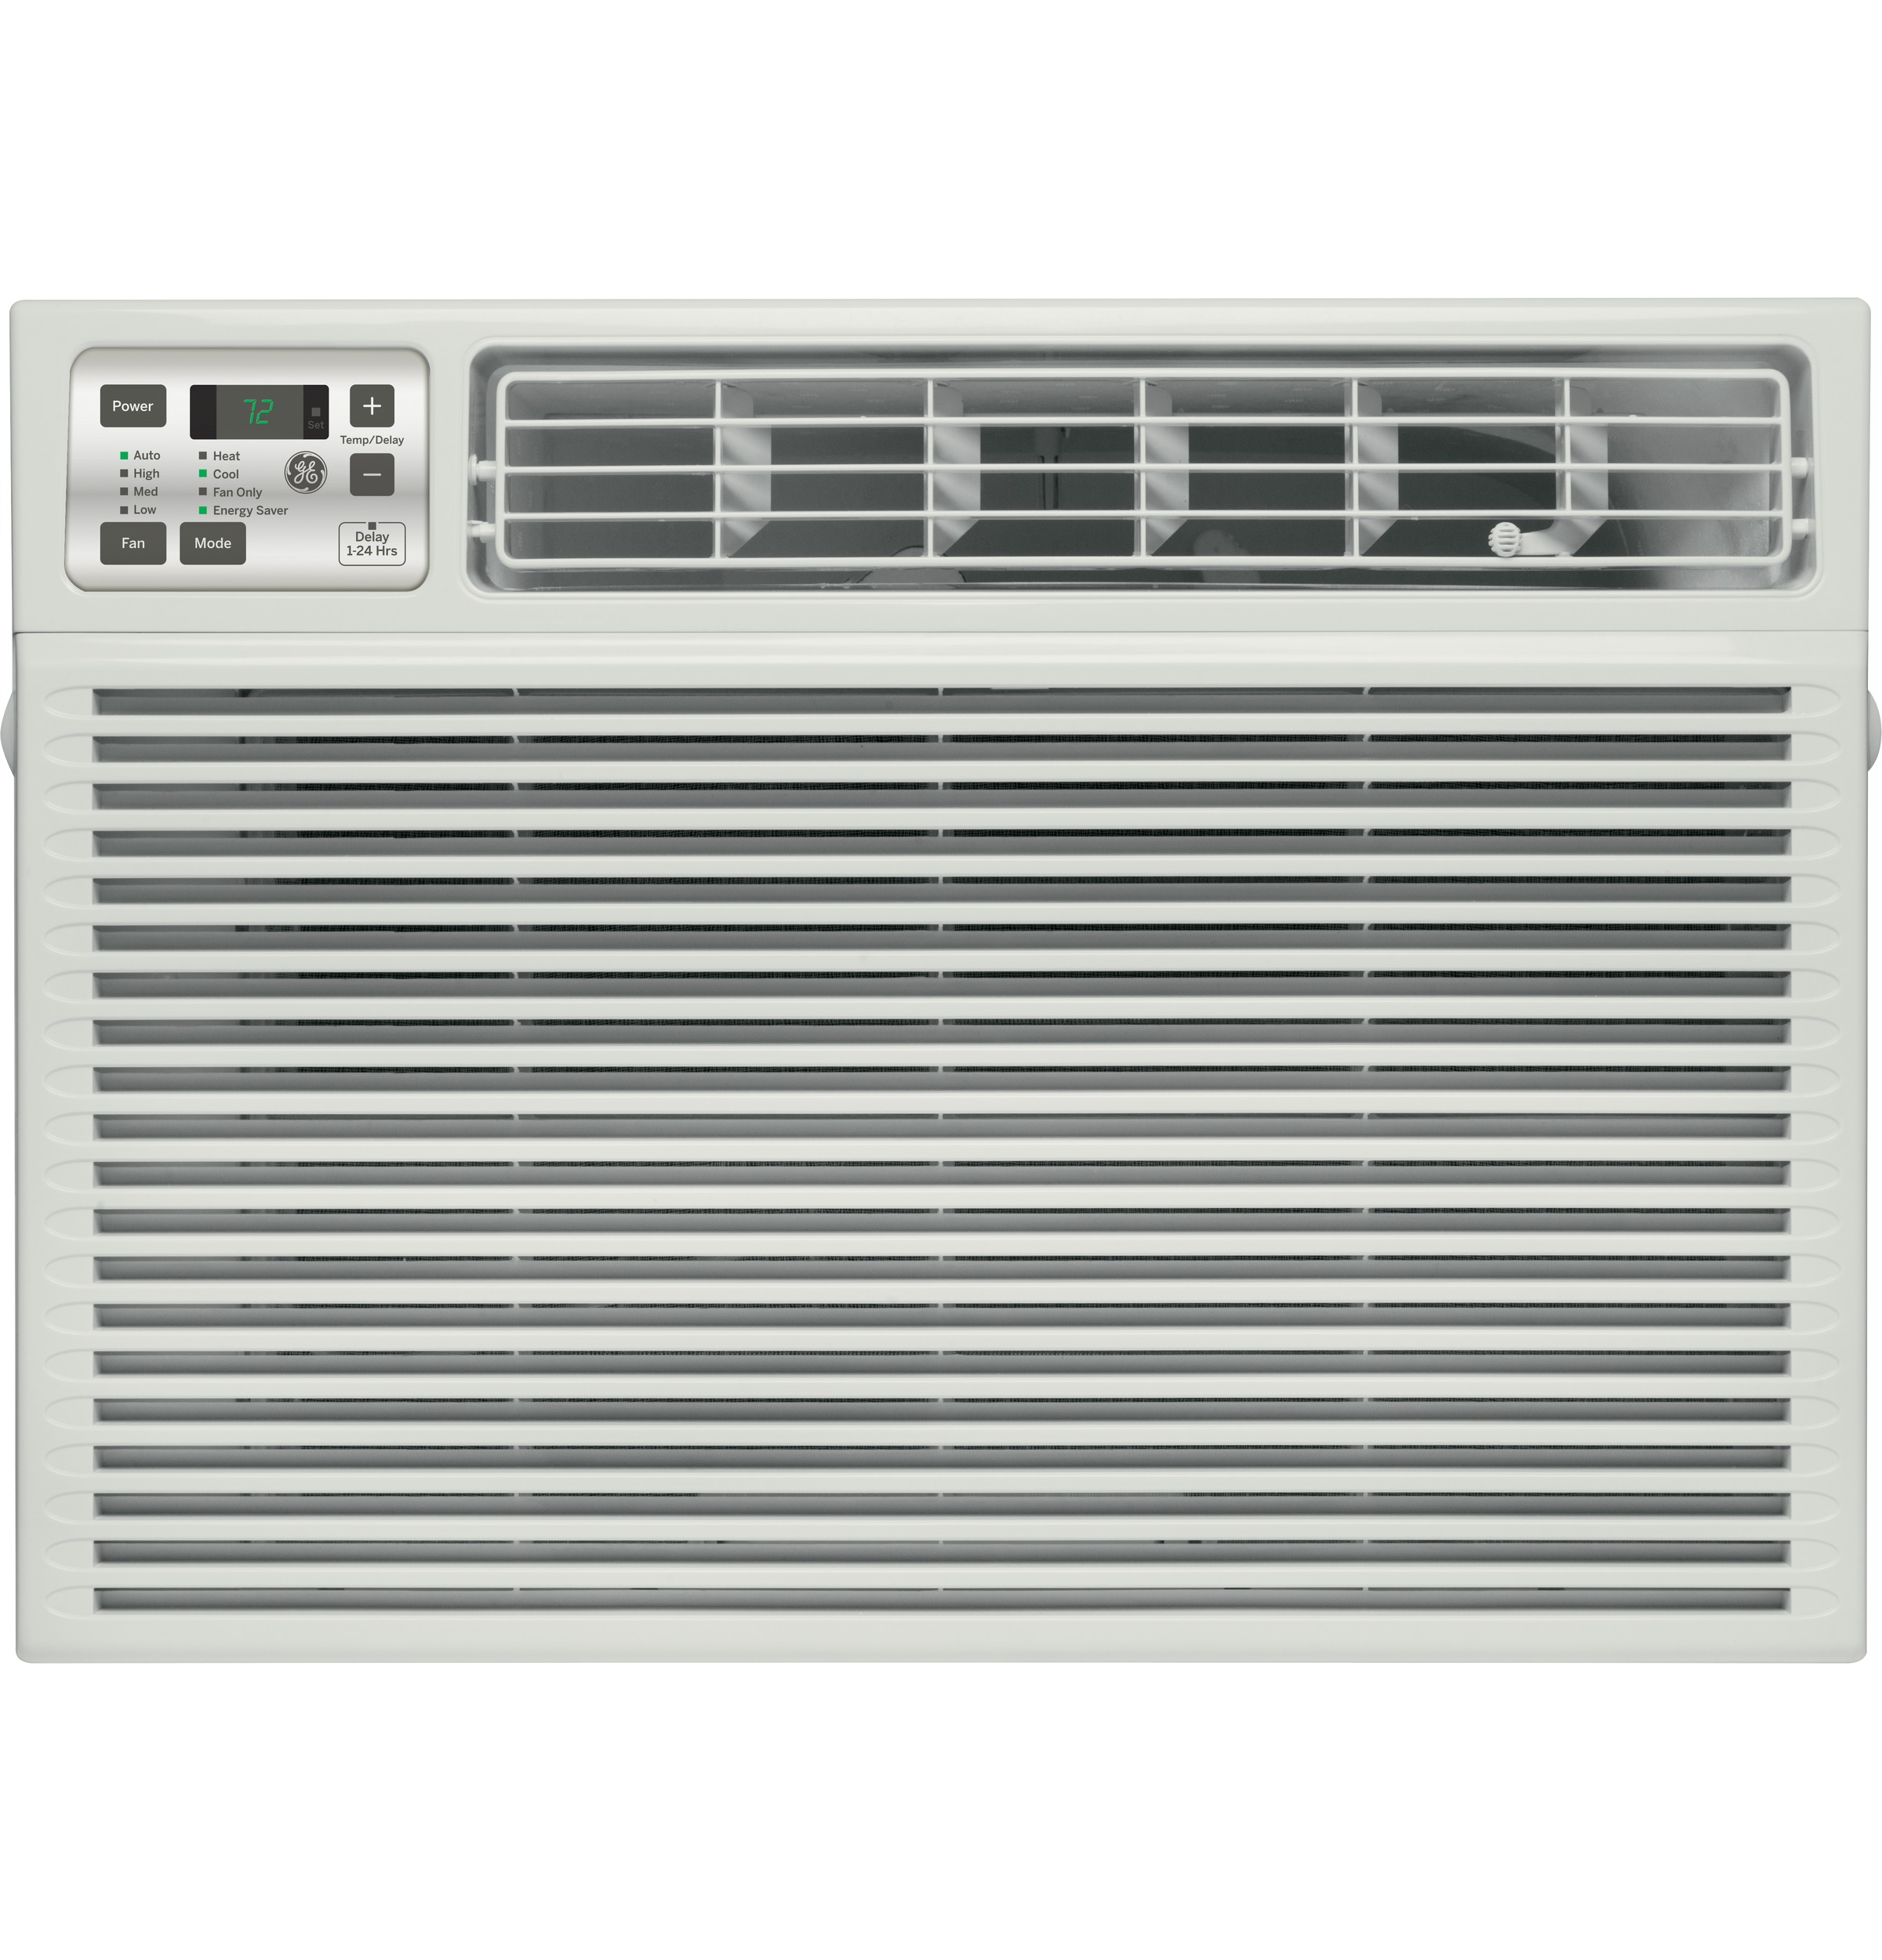 GE® 24,000 BTU Heat/Cool Electronic Window Air Conditioner for Extra-Large Rooms up to 1500 sq. ft.